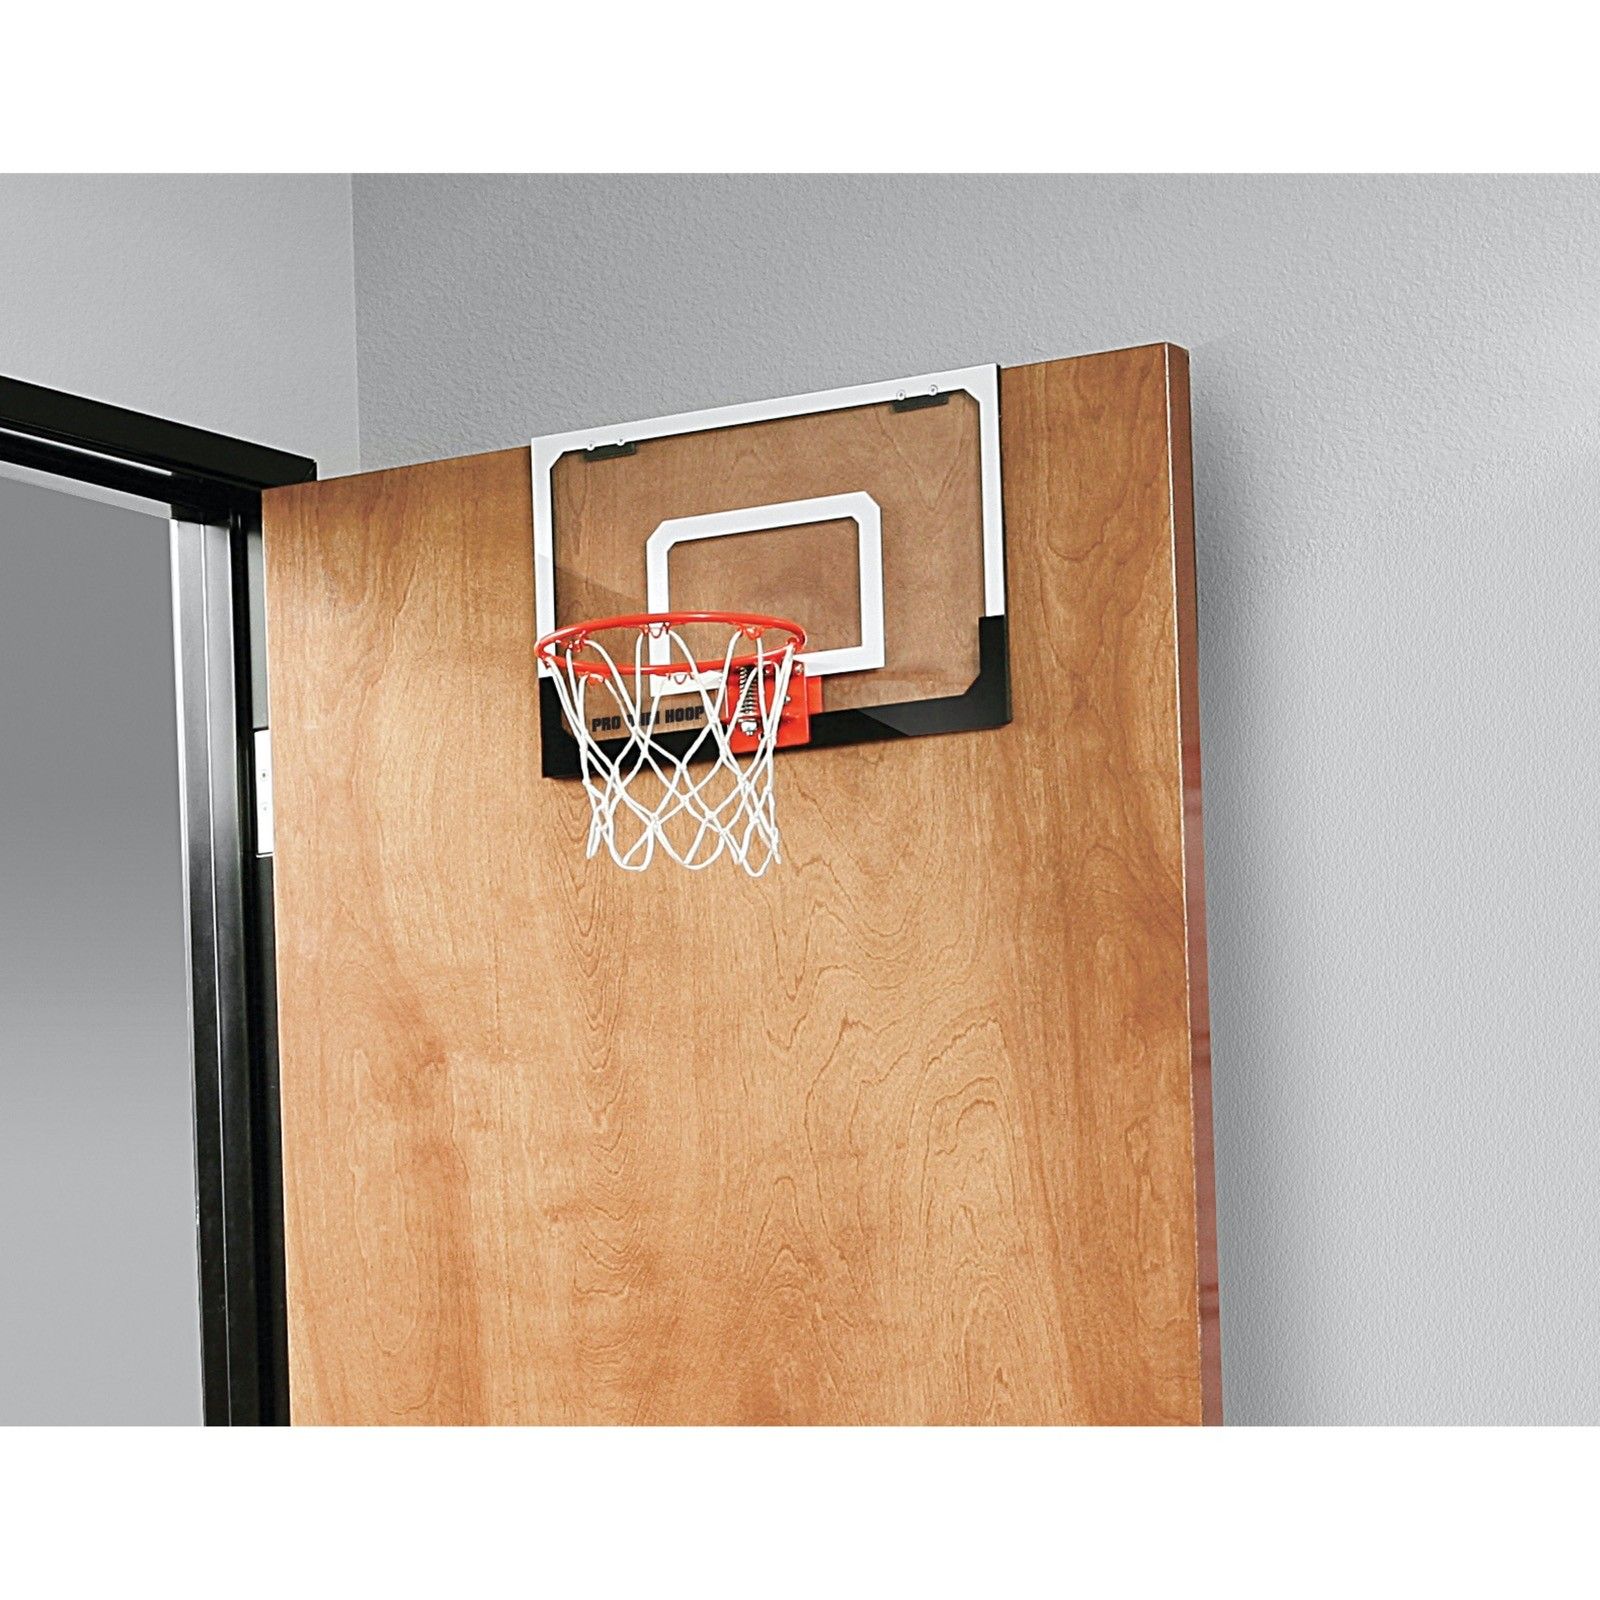 SKLZ Pro Mini Basketball Hoop with Ball, XL - 23 x 16 inches (Shipping)